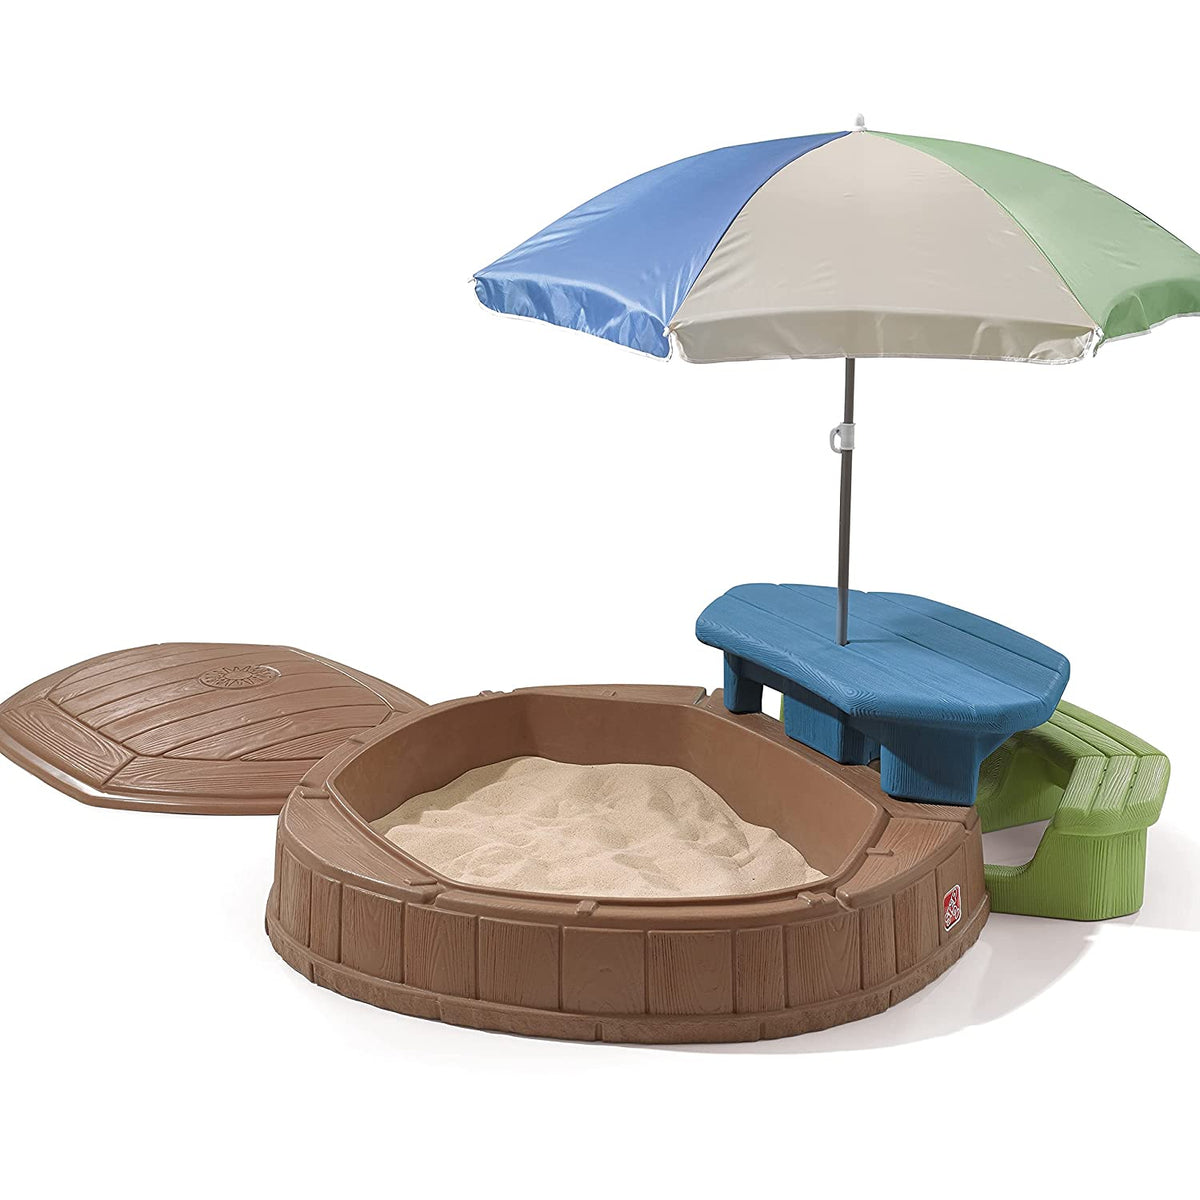 Step2 Naturally Playful Summertime Play Center Outdoor Sandplay Toy for Kids